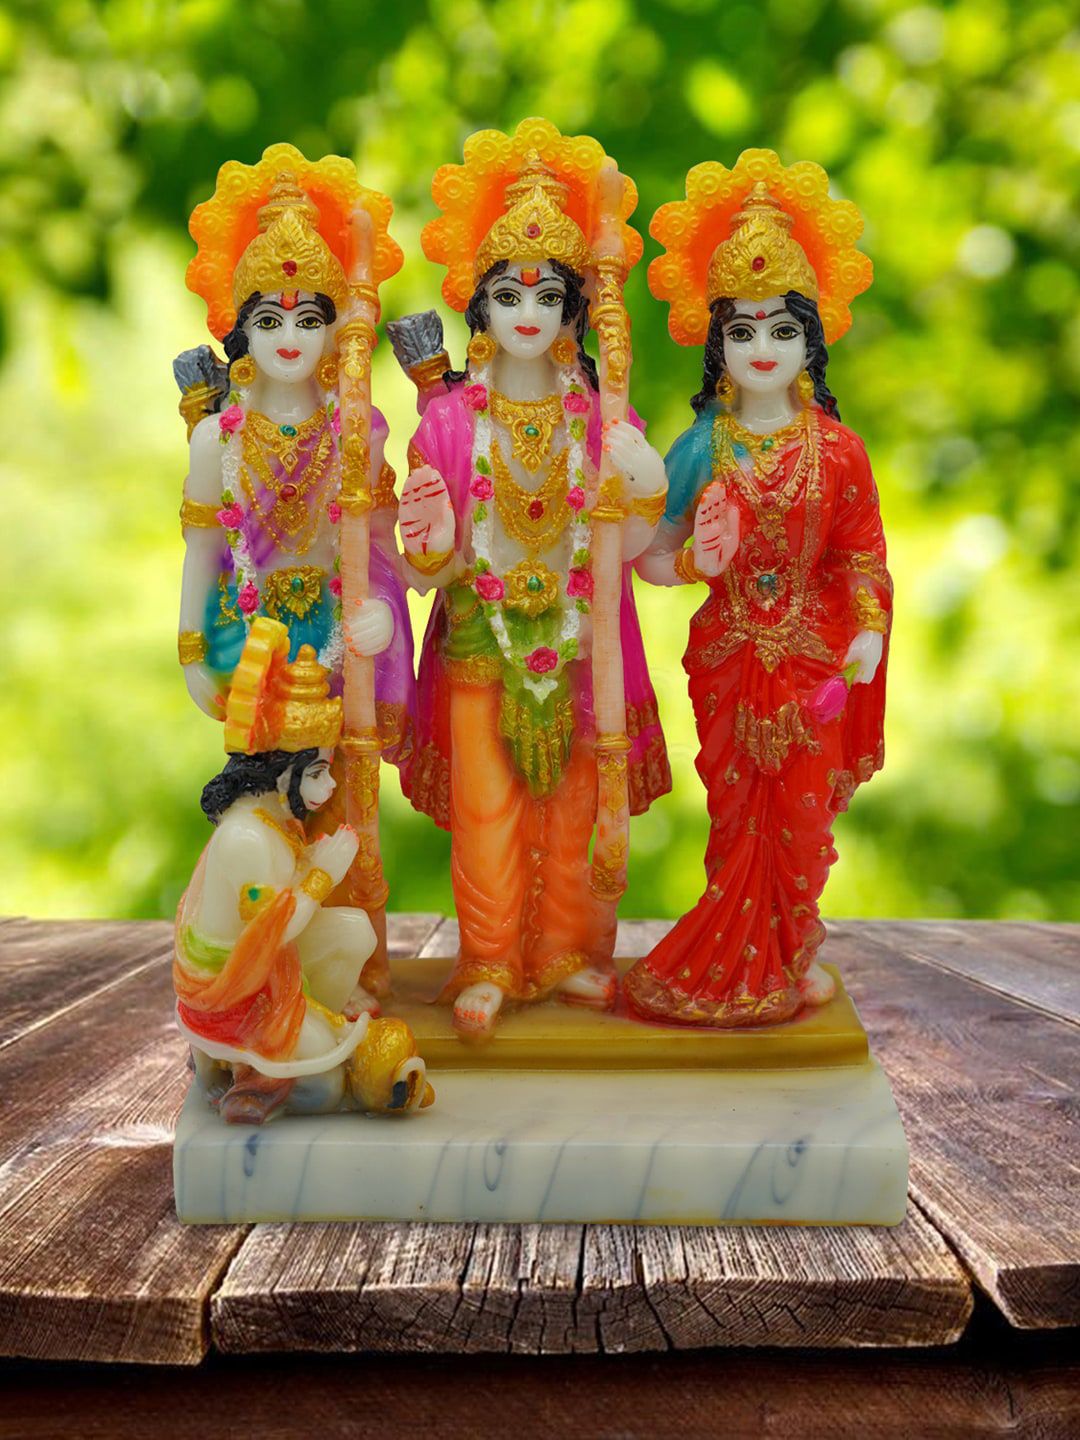 Gallery99 Yellow & Red Hand painted Ram Darbar Idol Showpieces Price in India